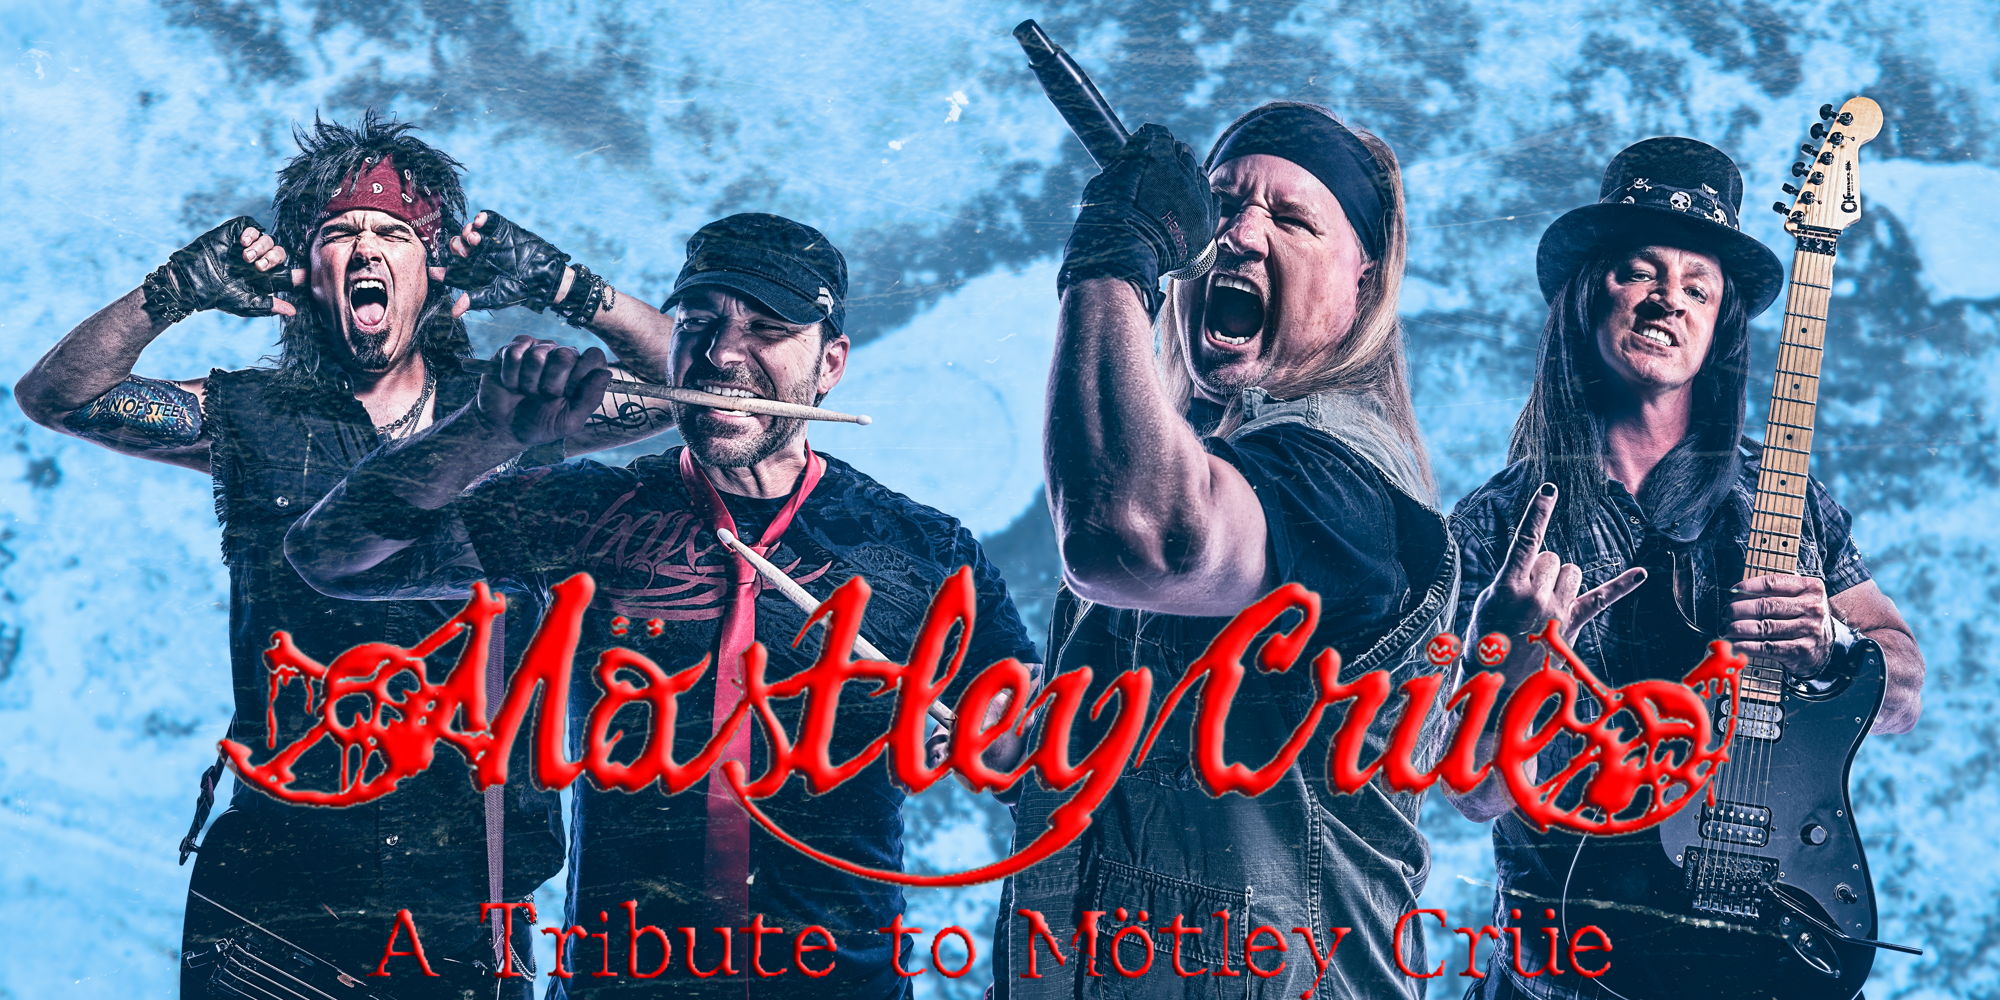 Mostley Crue: A Tribute To Motley Crue with special guests Seven Ten Oil at Elevation 27 promotional image